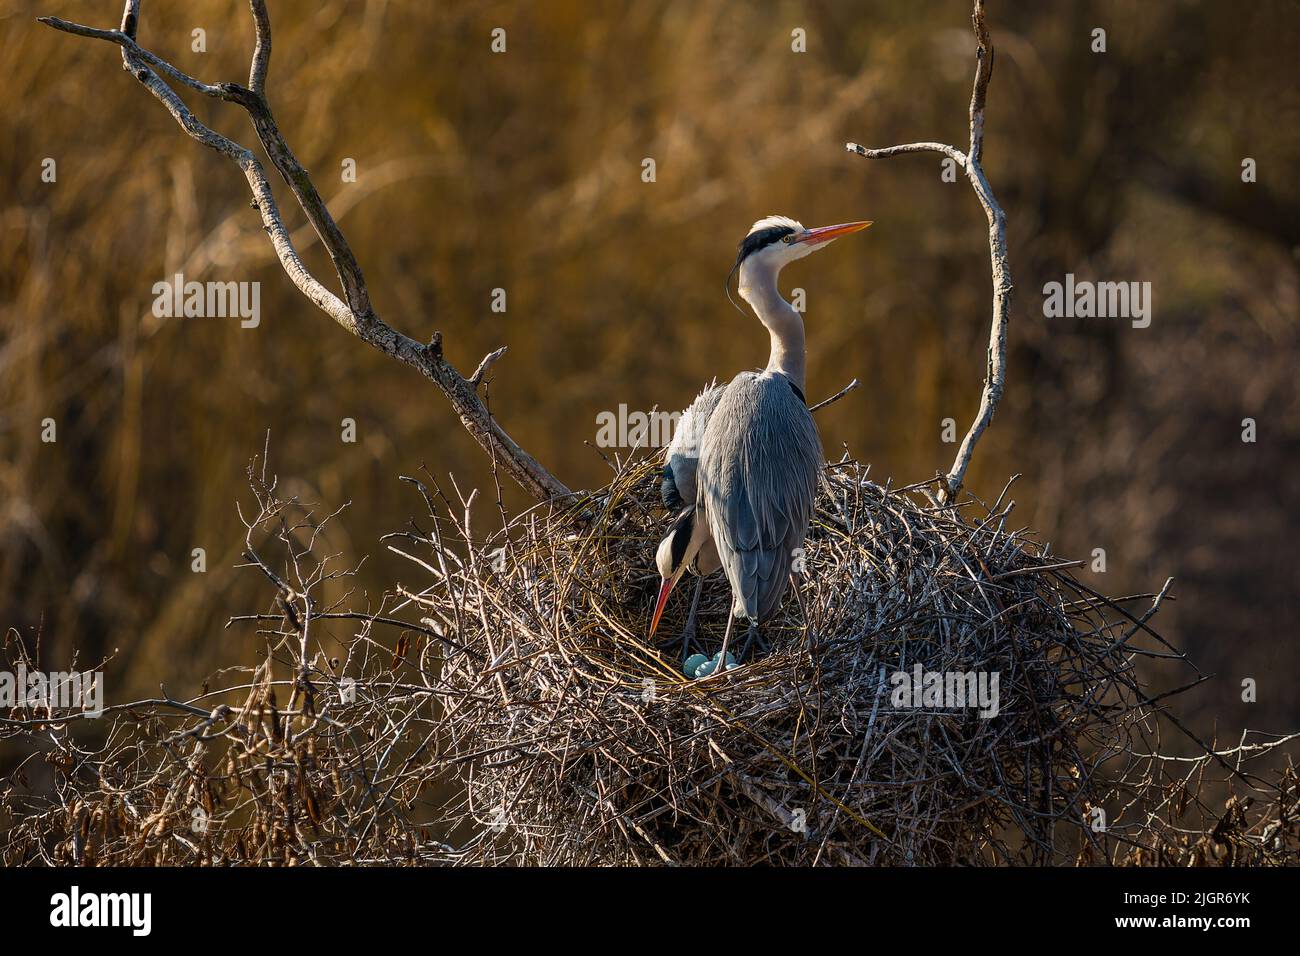 A pair of grey herons with orange beaks standing on the nest with four green eggs. Prague ZOO, Czech Republic. Stock Photo